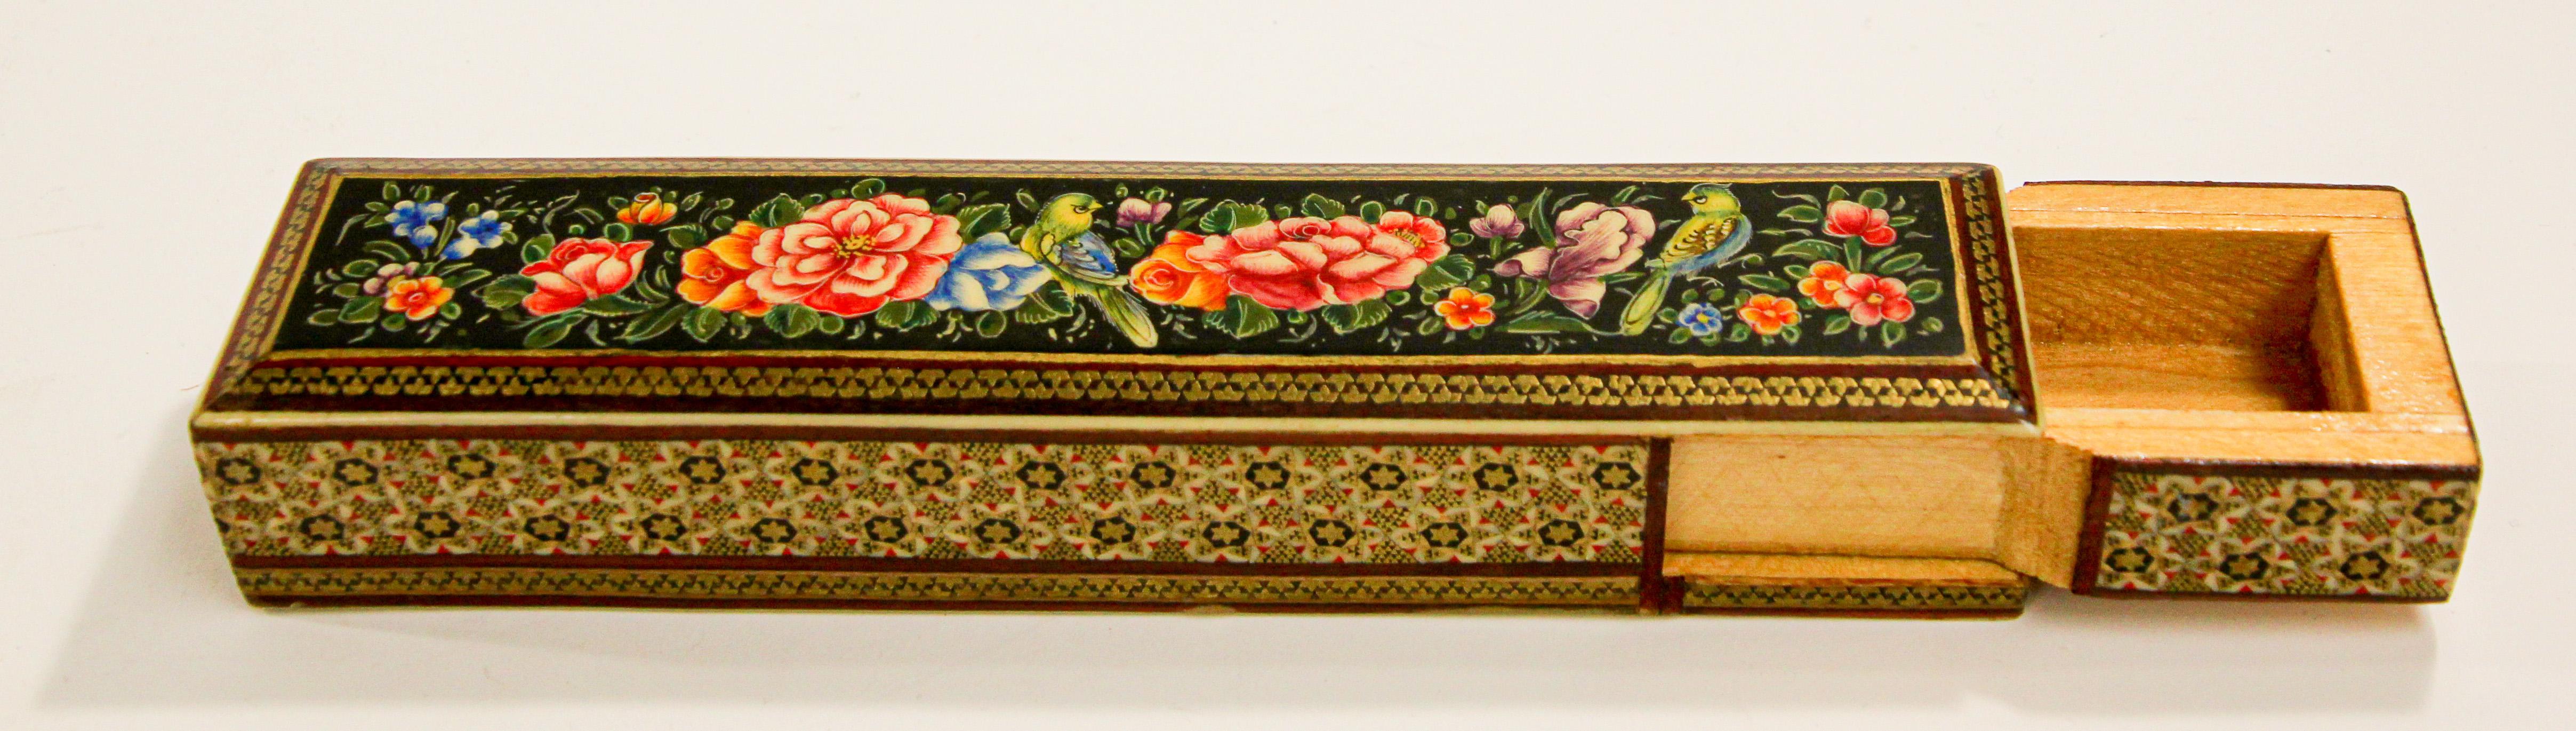 Indian Persian Lacquer Pen Box Hand Painted with Floral Design For Sale